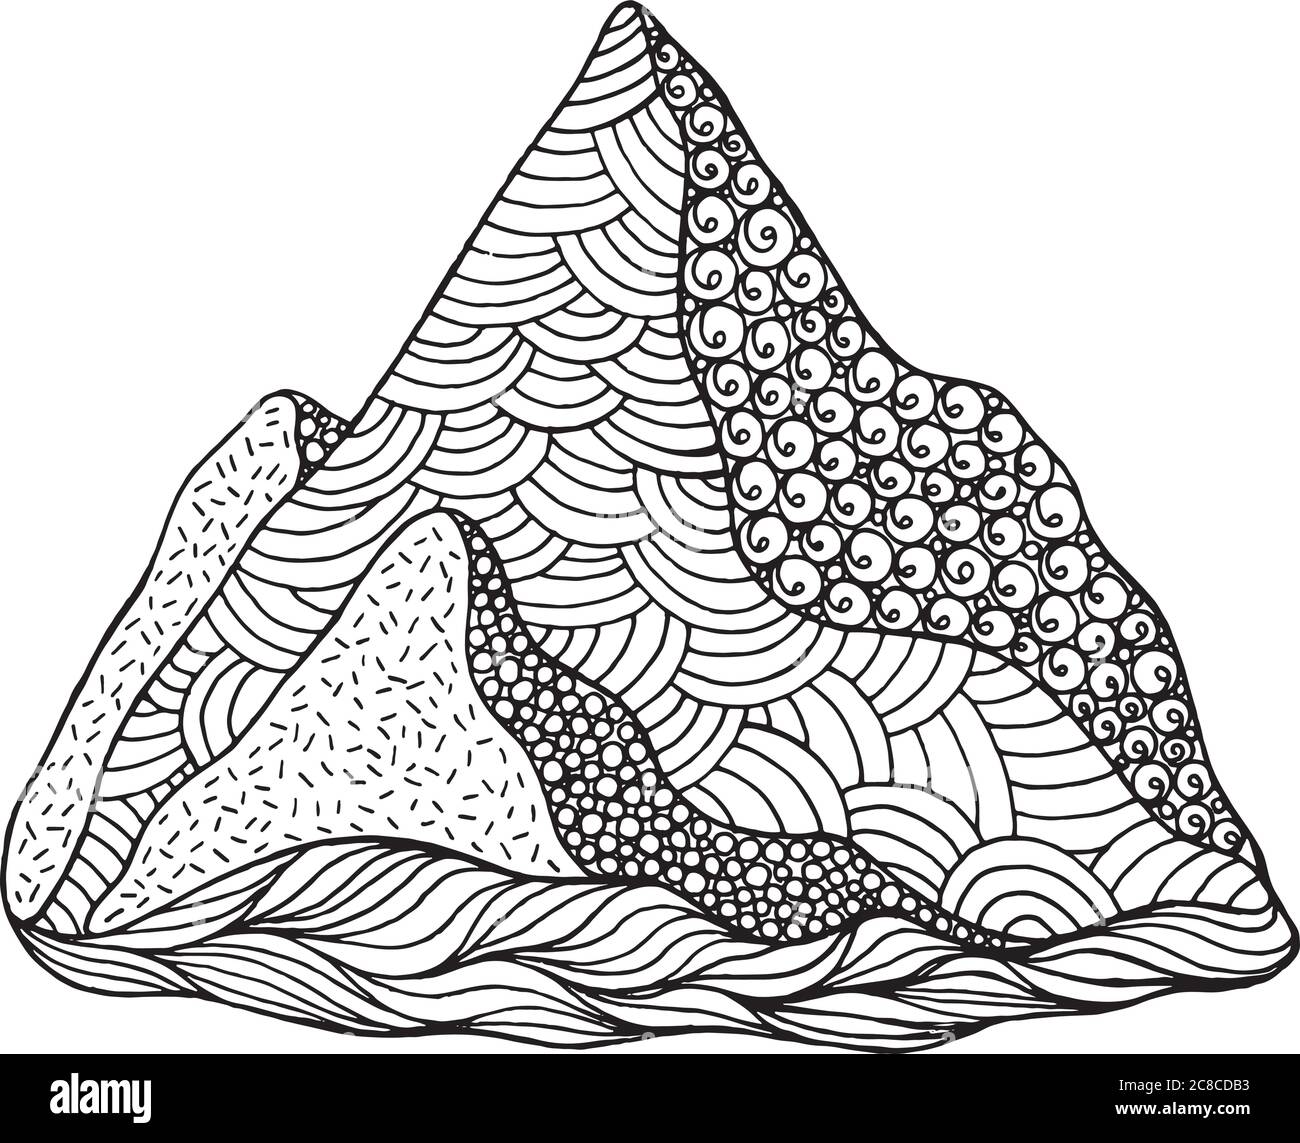 Doodle mountain coloring page. Cartoon artwork with nature eleme Stock Vector